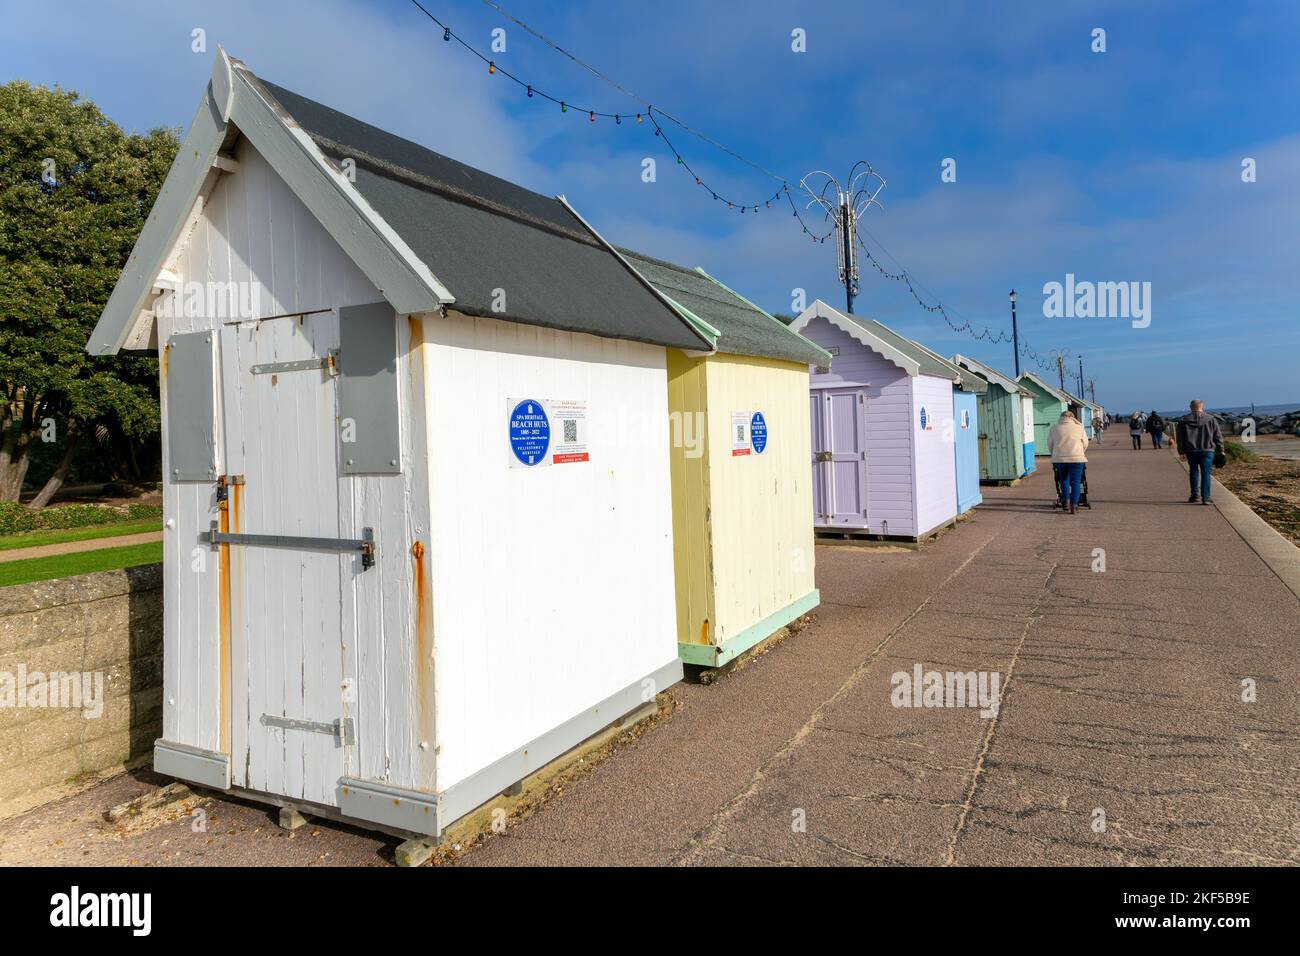 Historic wooden beach huts from 1880s on seafront, Felixstowe, Suffolk, England, UK Stock Photo